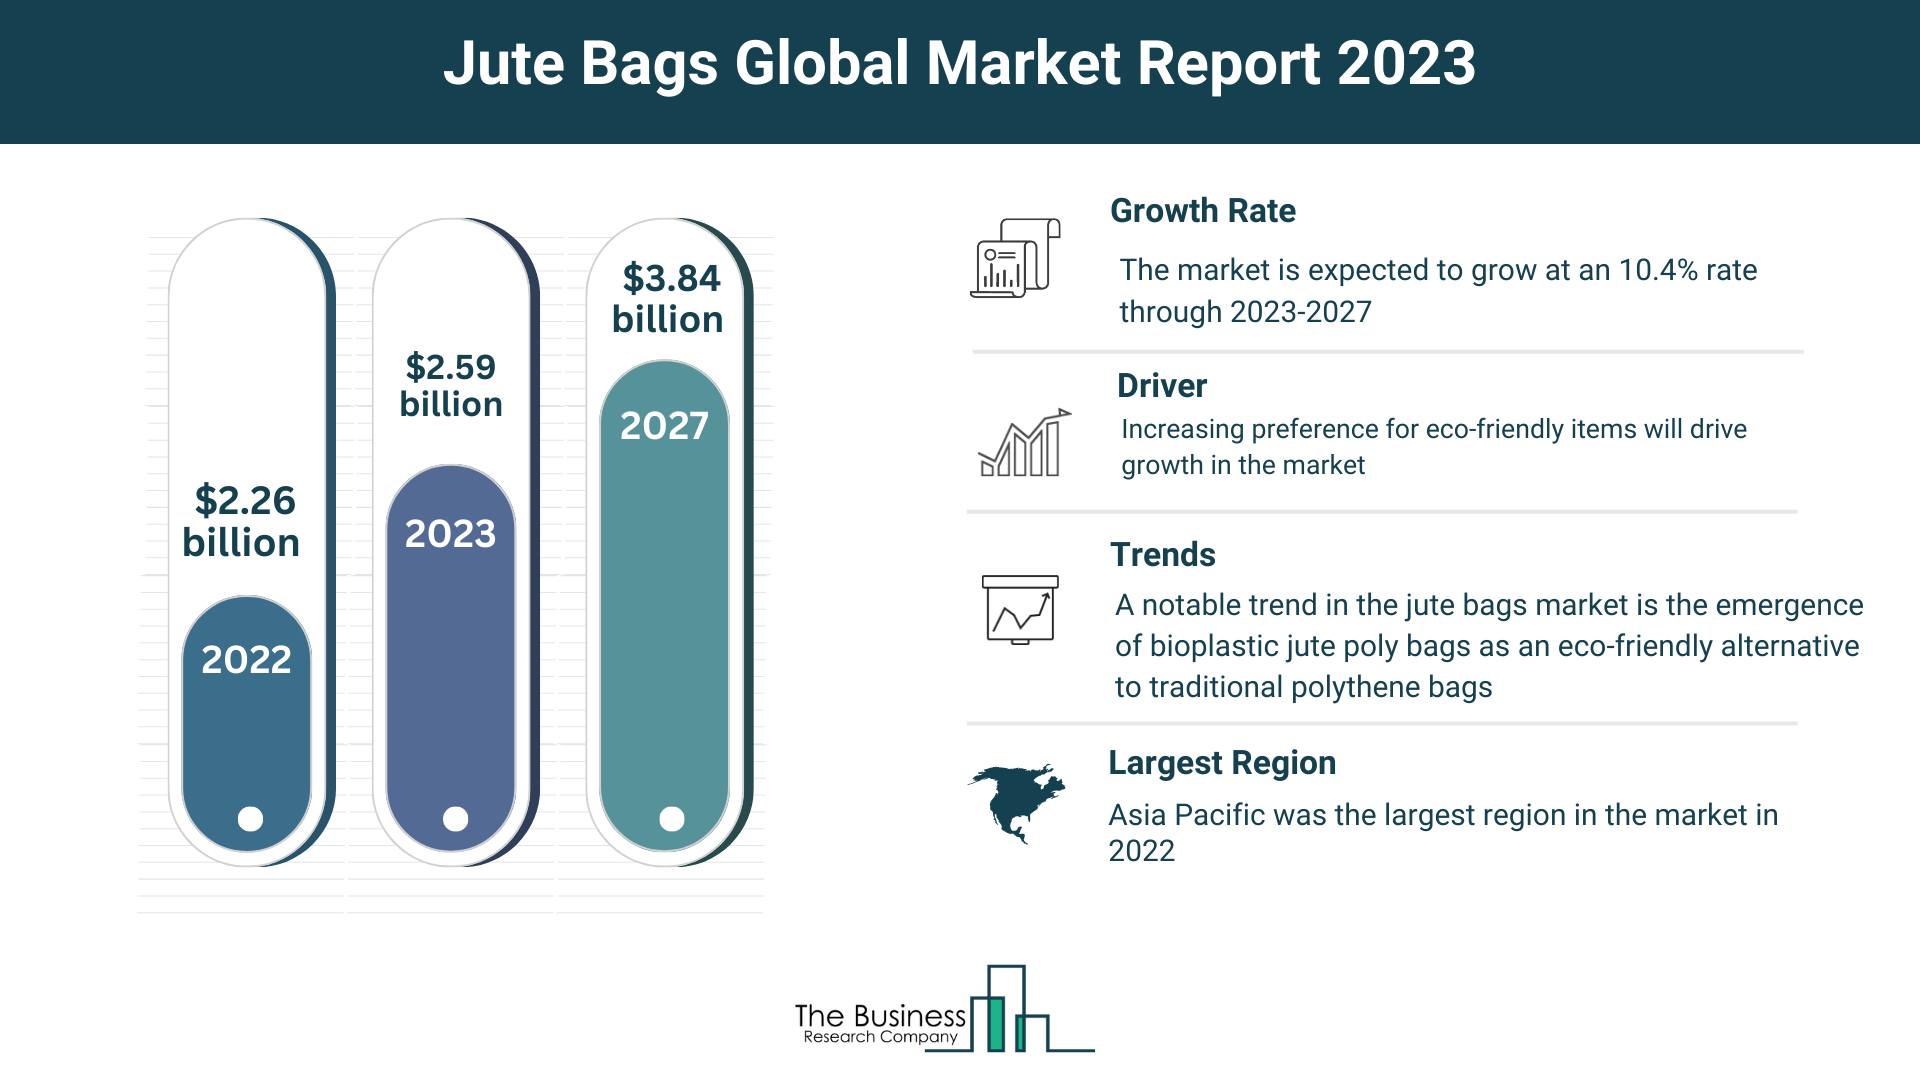 Global Jute Bags Market Analysis: Size, Drivers, Trends, Opportunities And Strategies